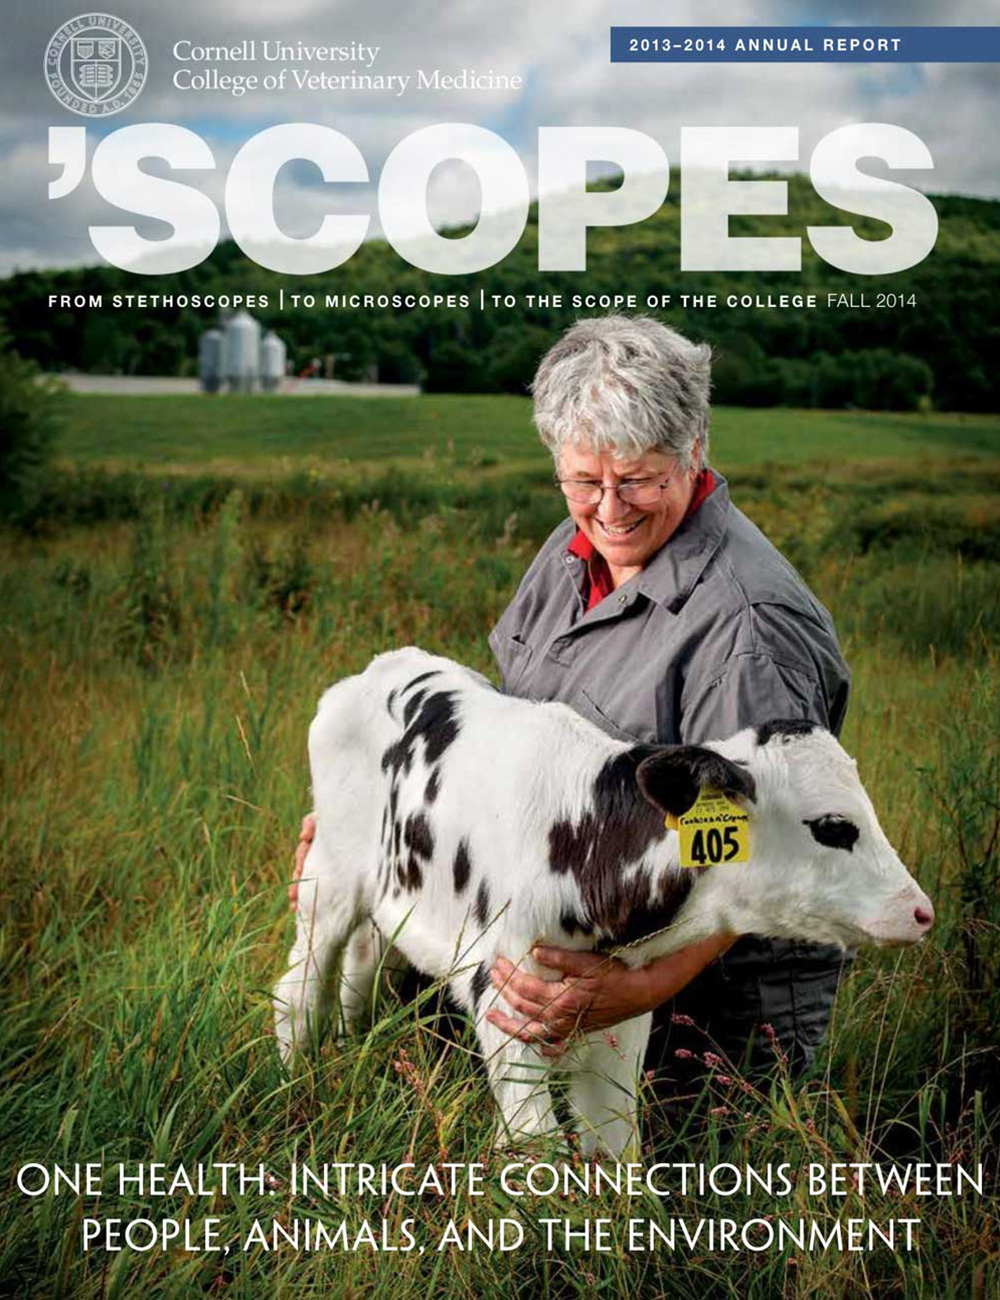 Scopes cover for the 2013-2014 annual report featuring a veterinarian and a dairy calf.